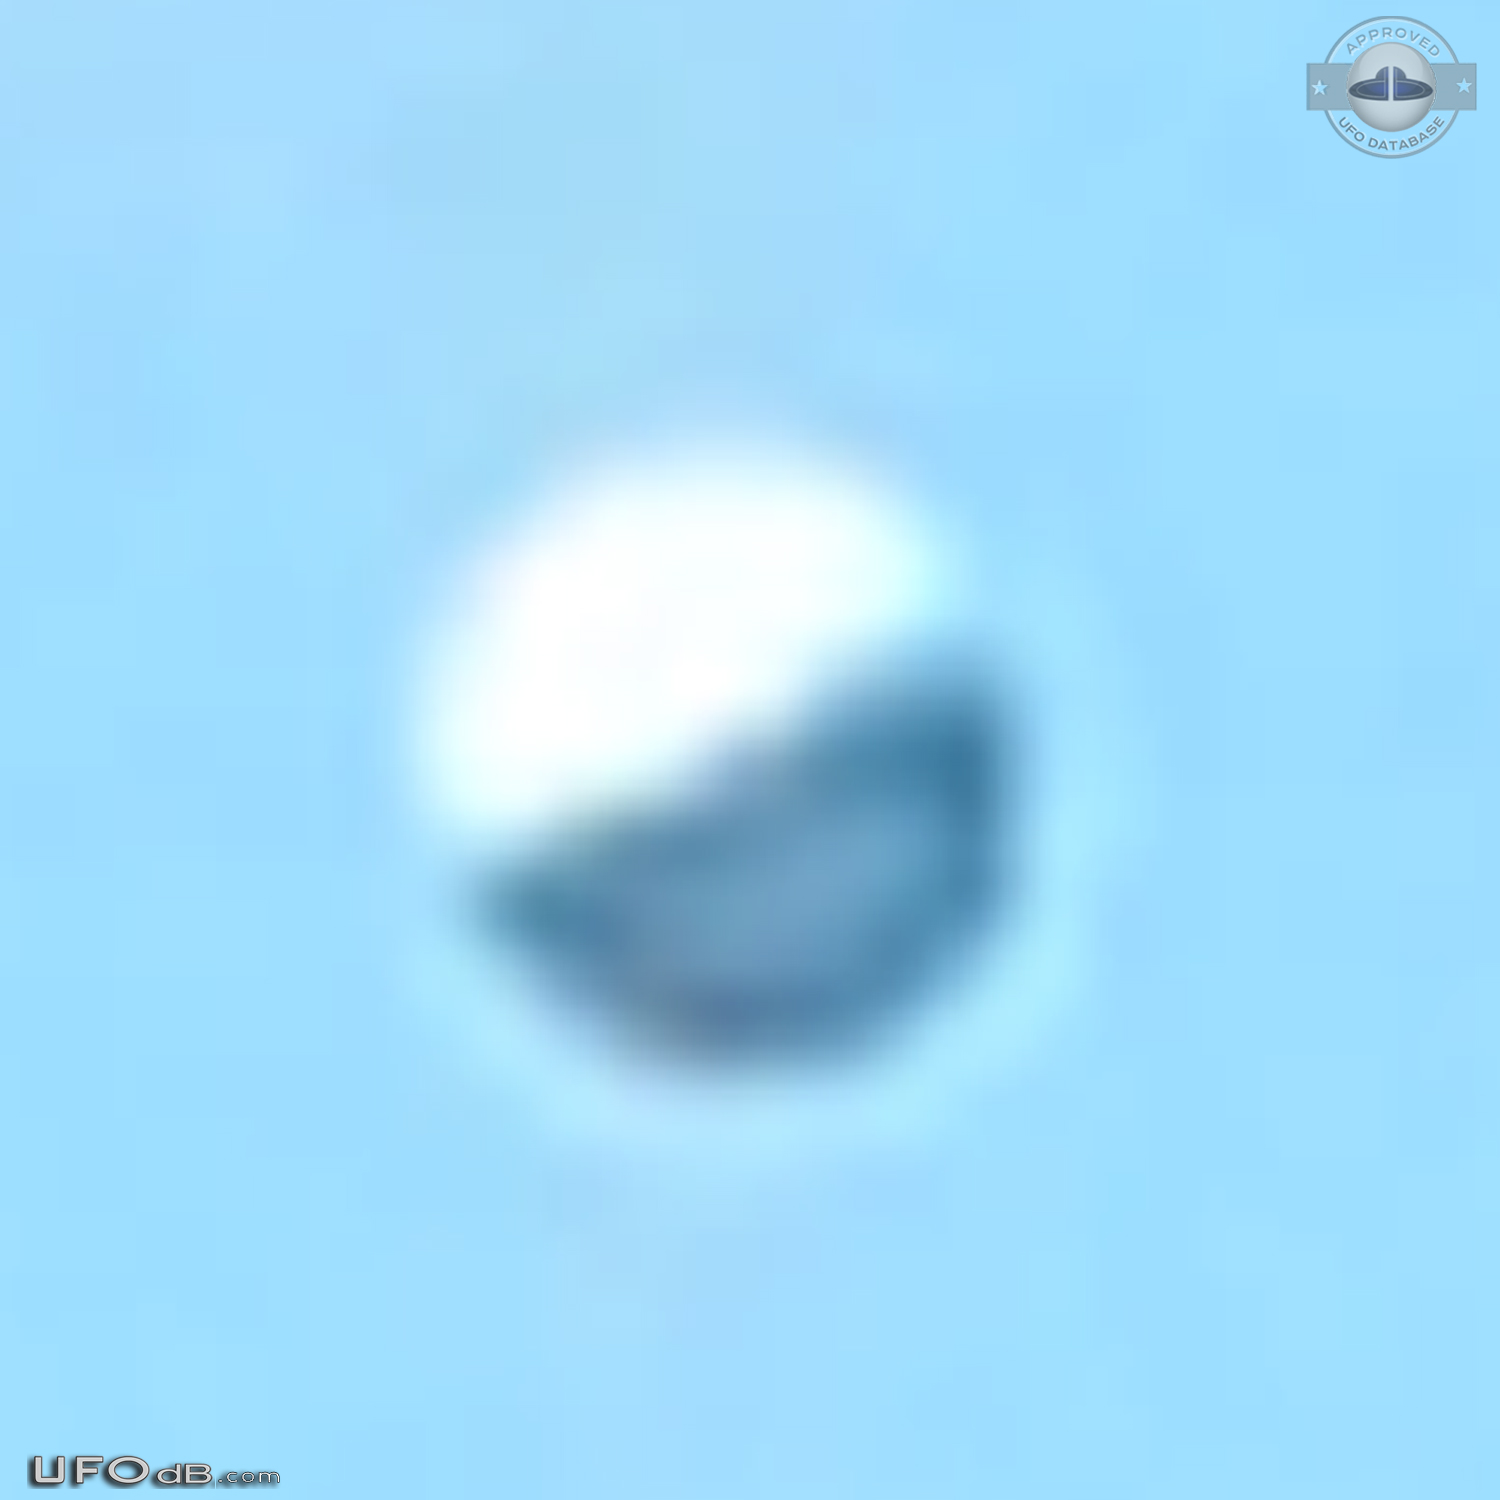 Picture of vacationing in Denver Colorado get UFO sphere in the Sky -  UFO Picture #720-6